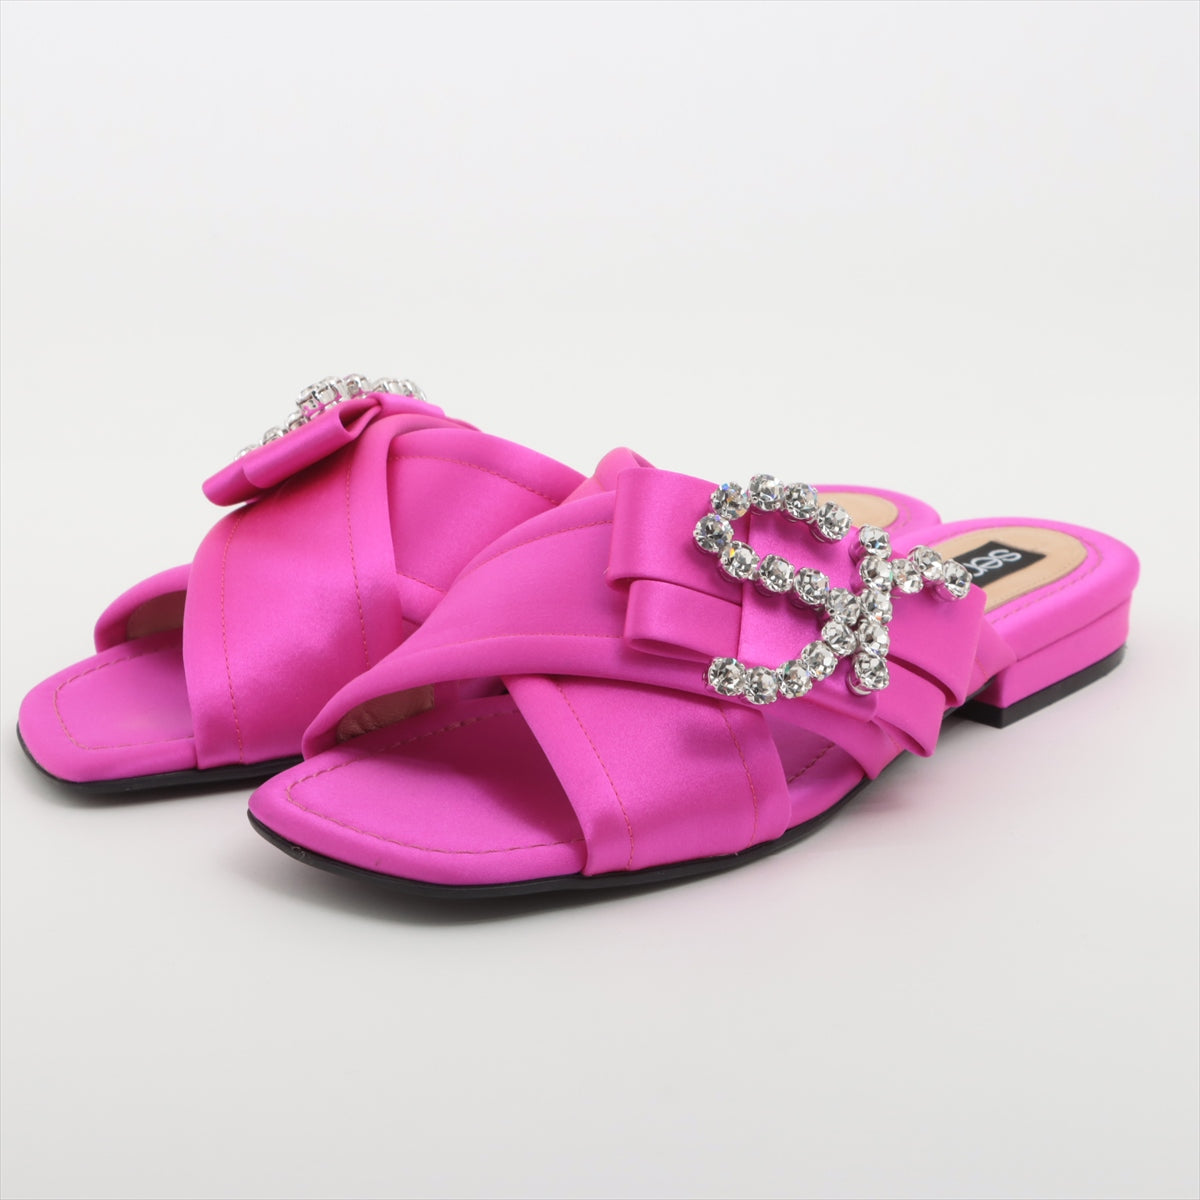 Sergio Rossi Satin Sandals 35 Ladies' Pink A83730 box There is a bag Bijou